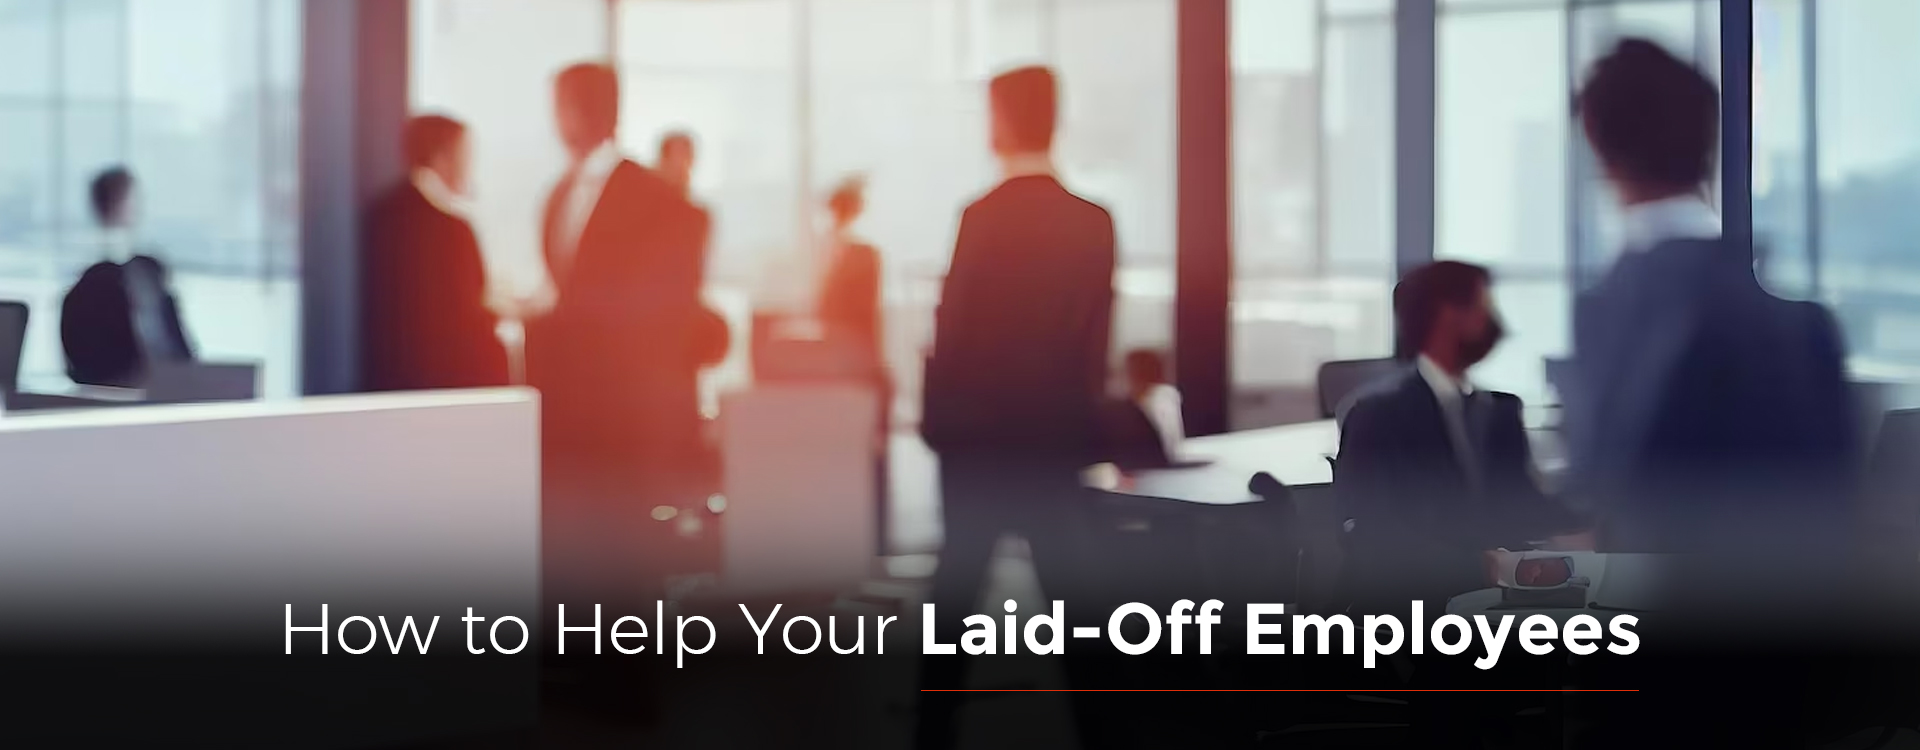 How to Help Your Laid-Off Employees